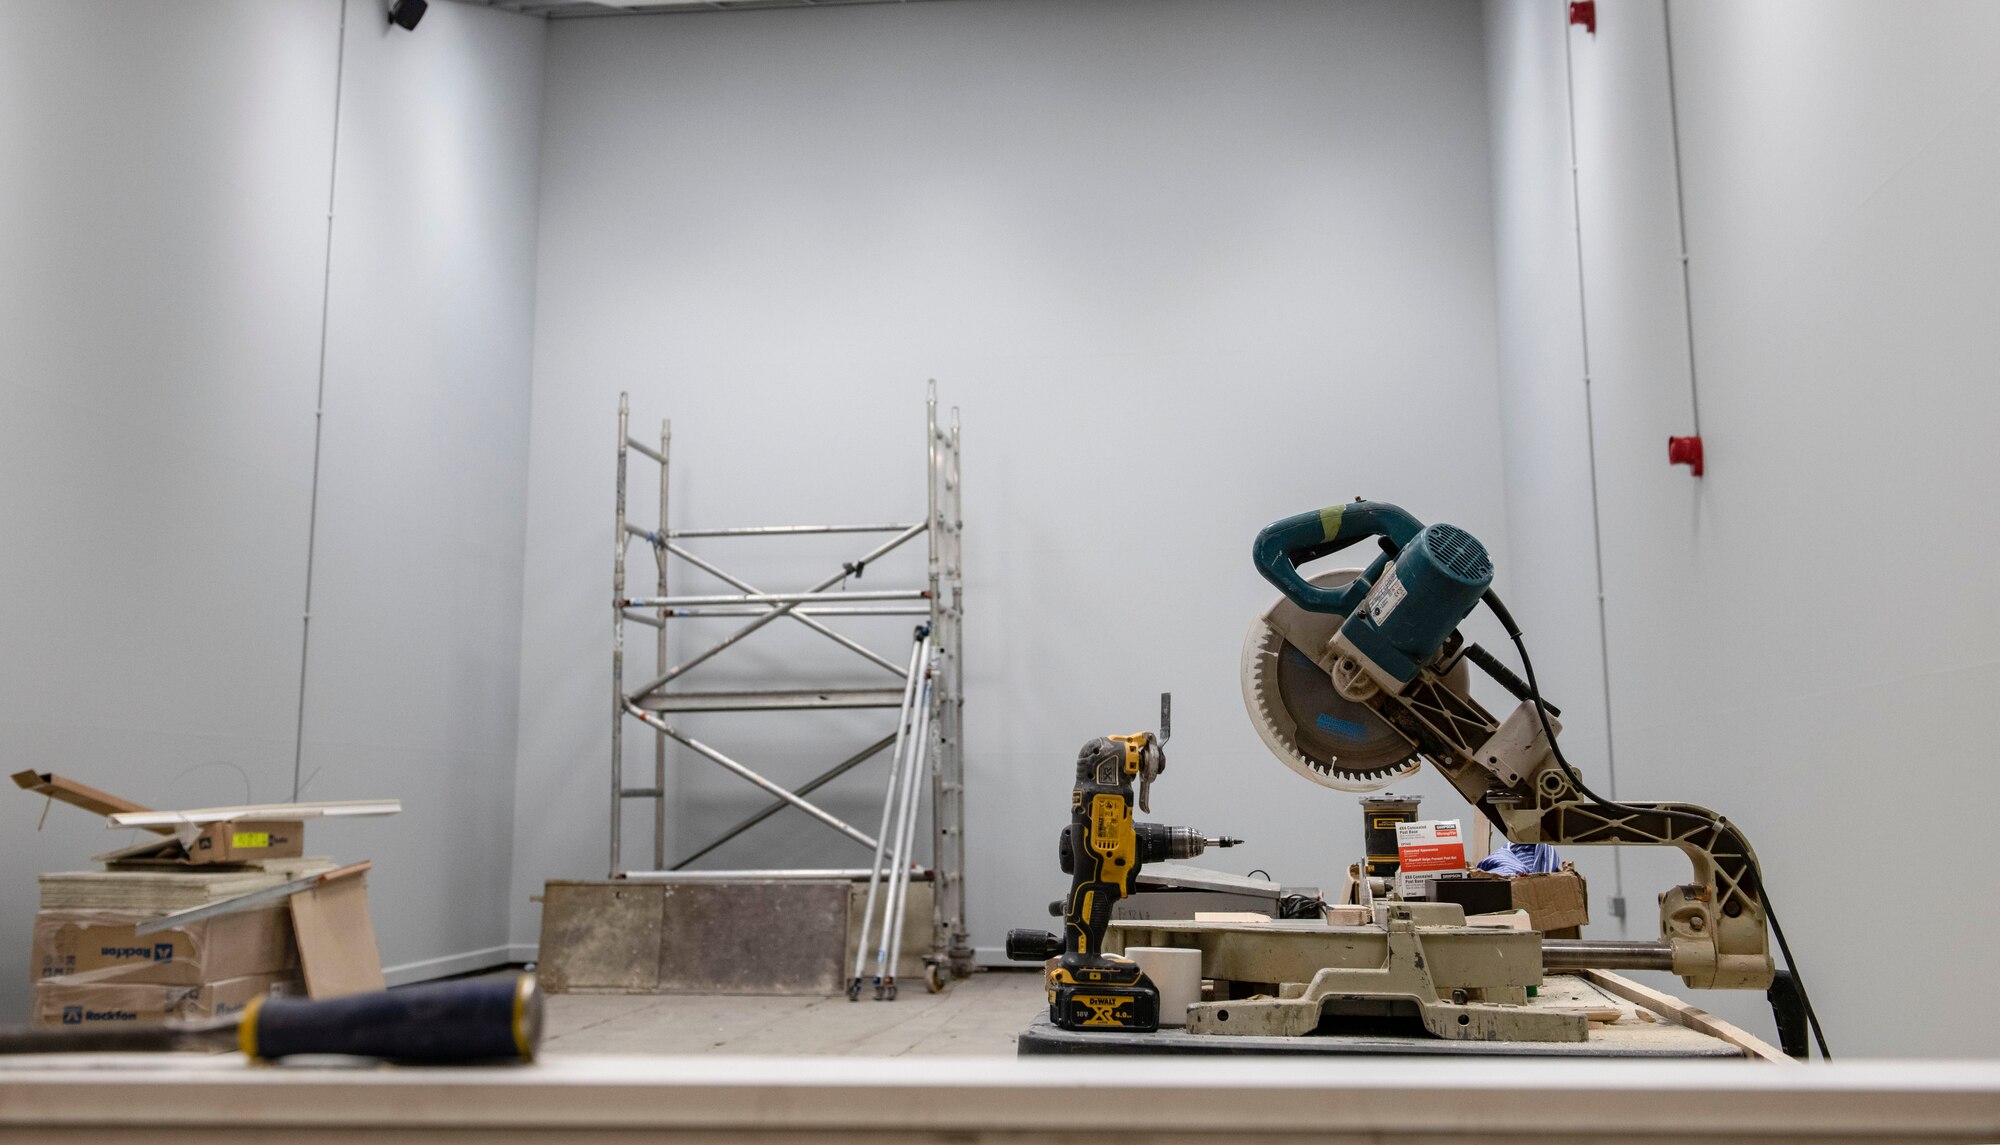 The former racquetball court undergoes construction at RAF Croughton